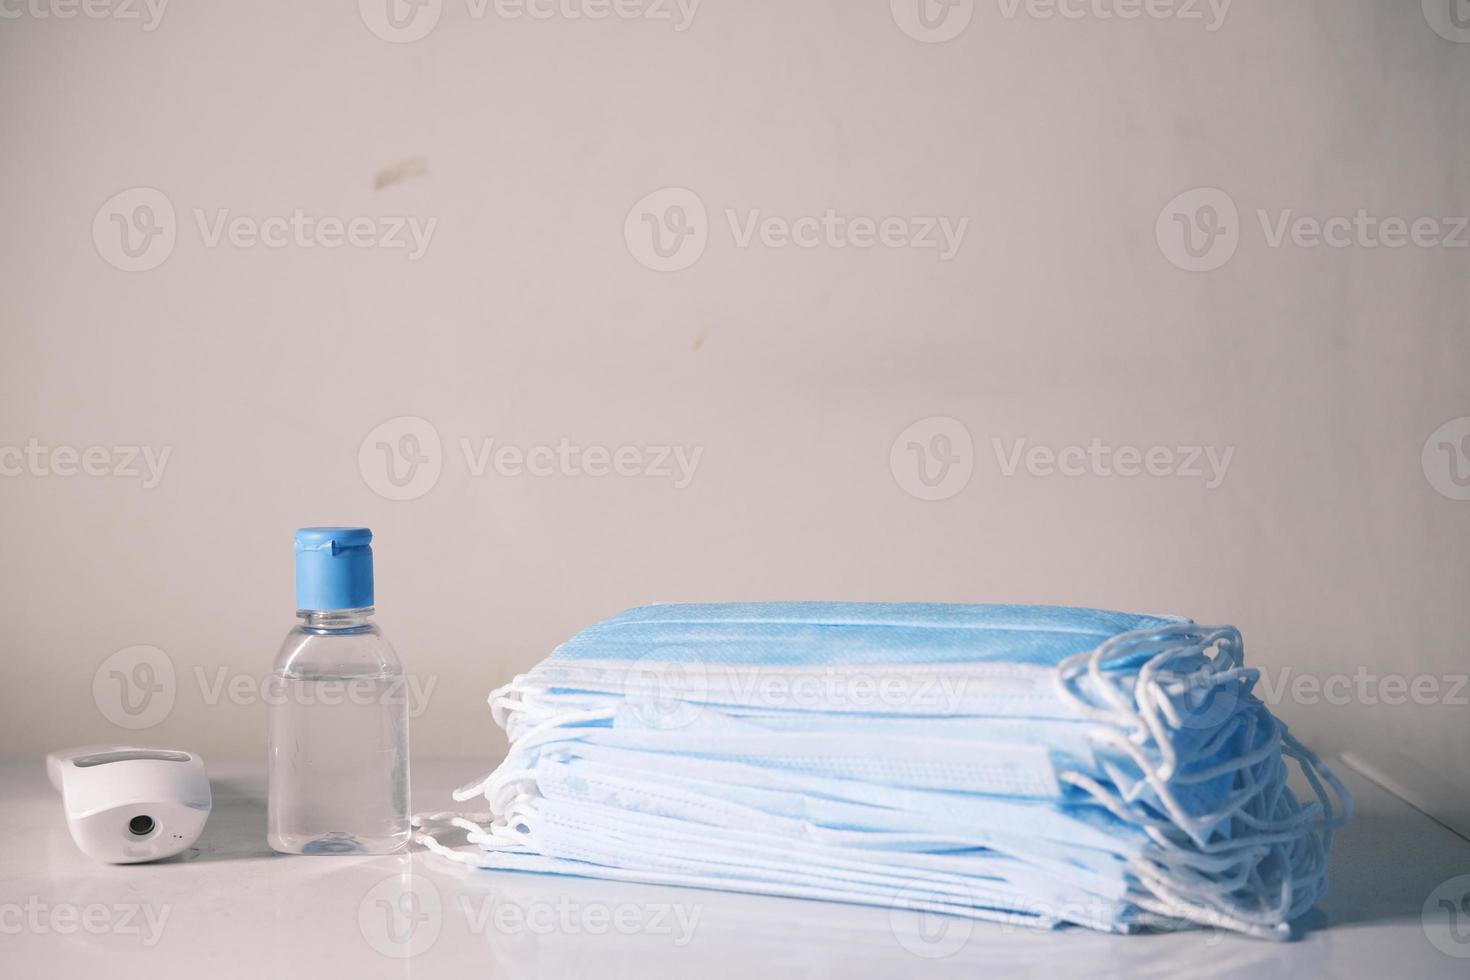 Surgical masks, thermometer, and hand sanitizer on neutral background photo